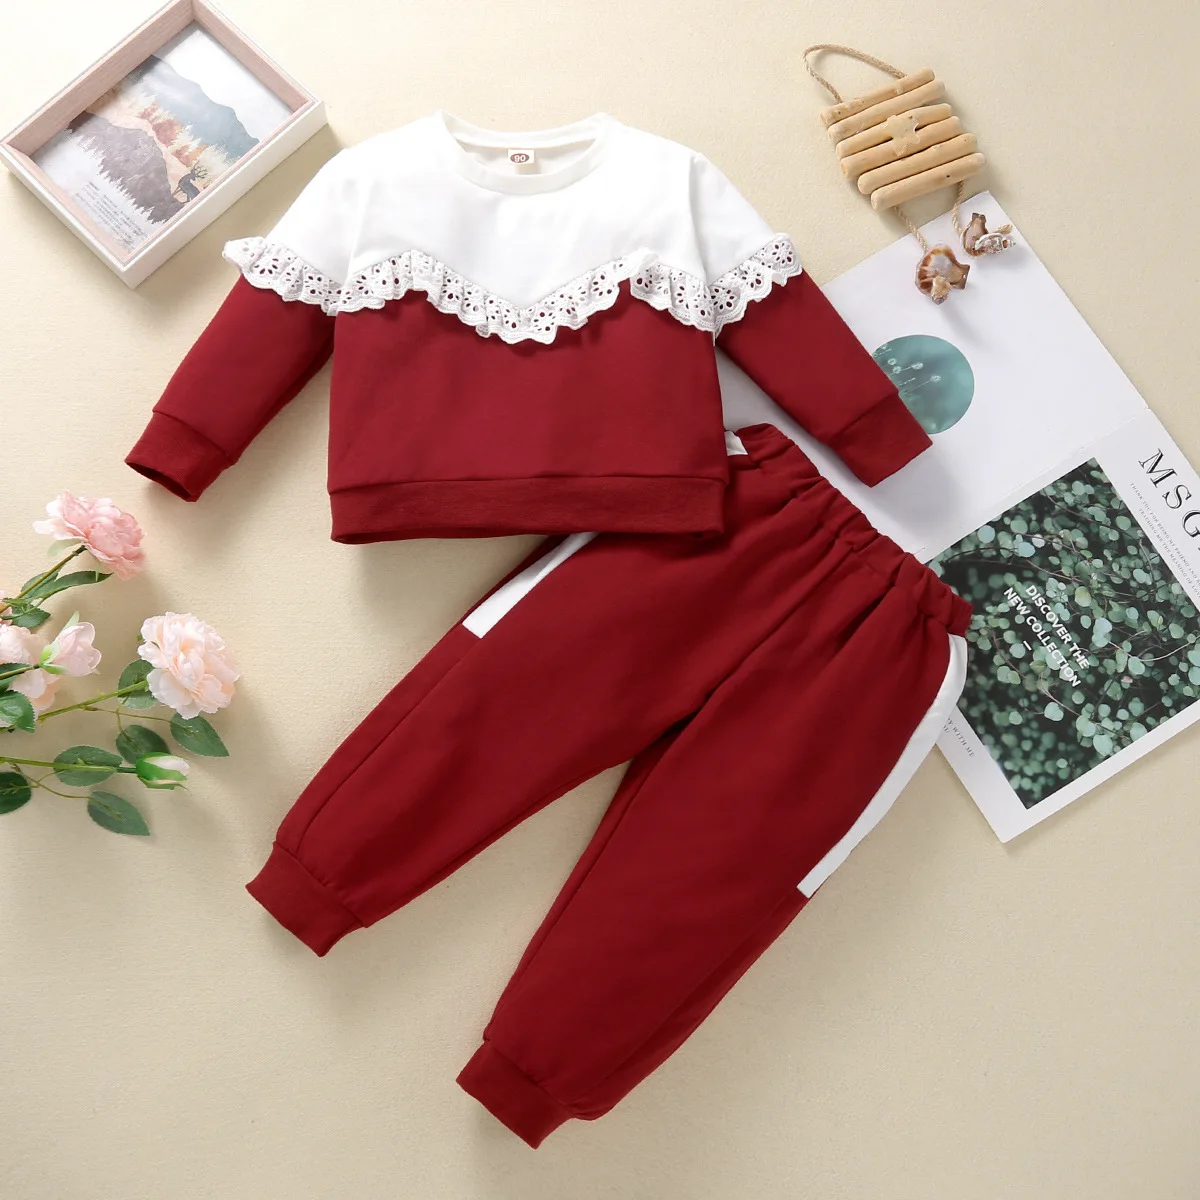 INS style autumn winter toddler girls clothing sets splicing pullover sweatshirt tops+casual pants 2pcs clothes for kids